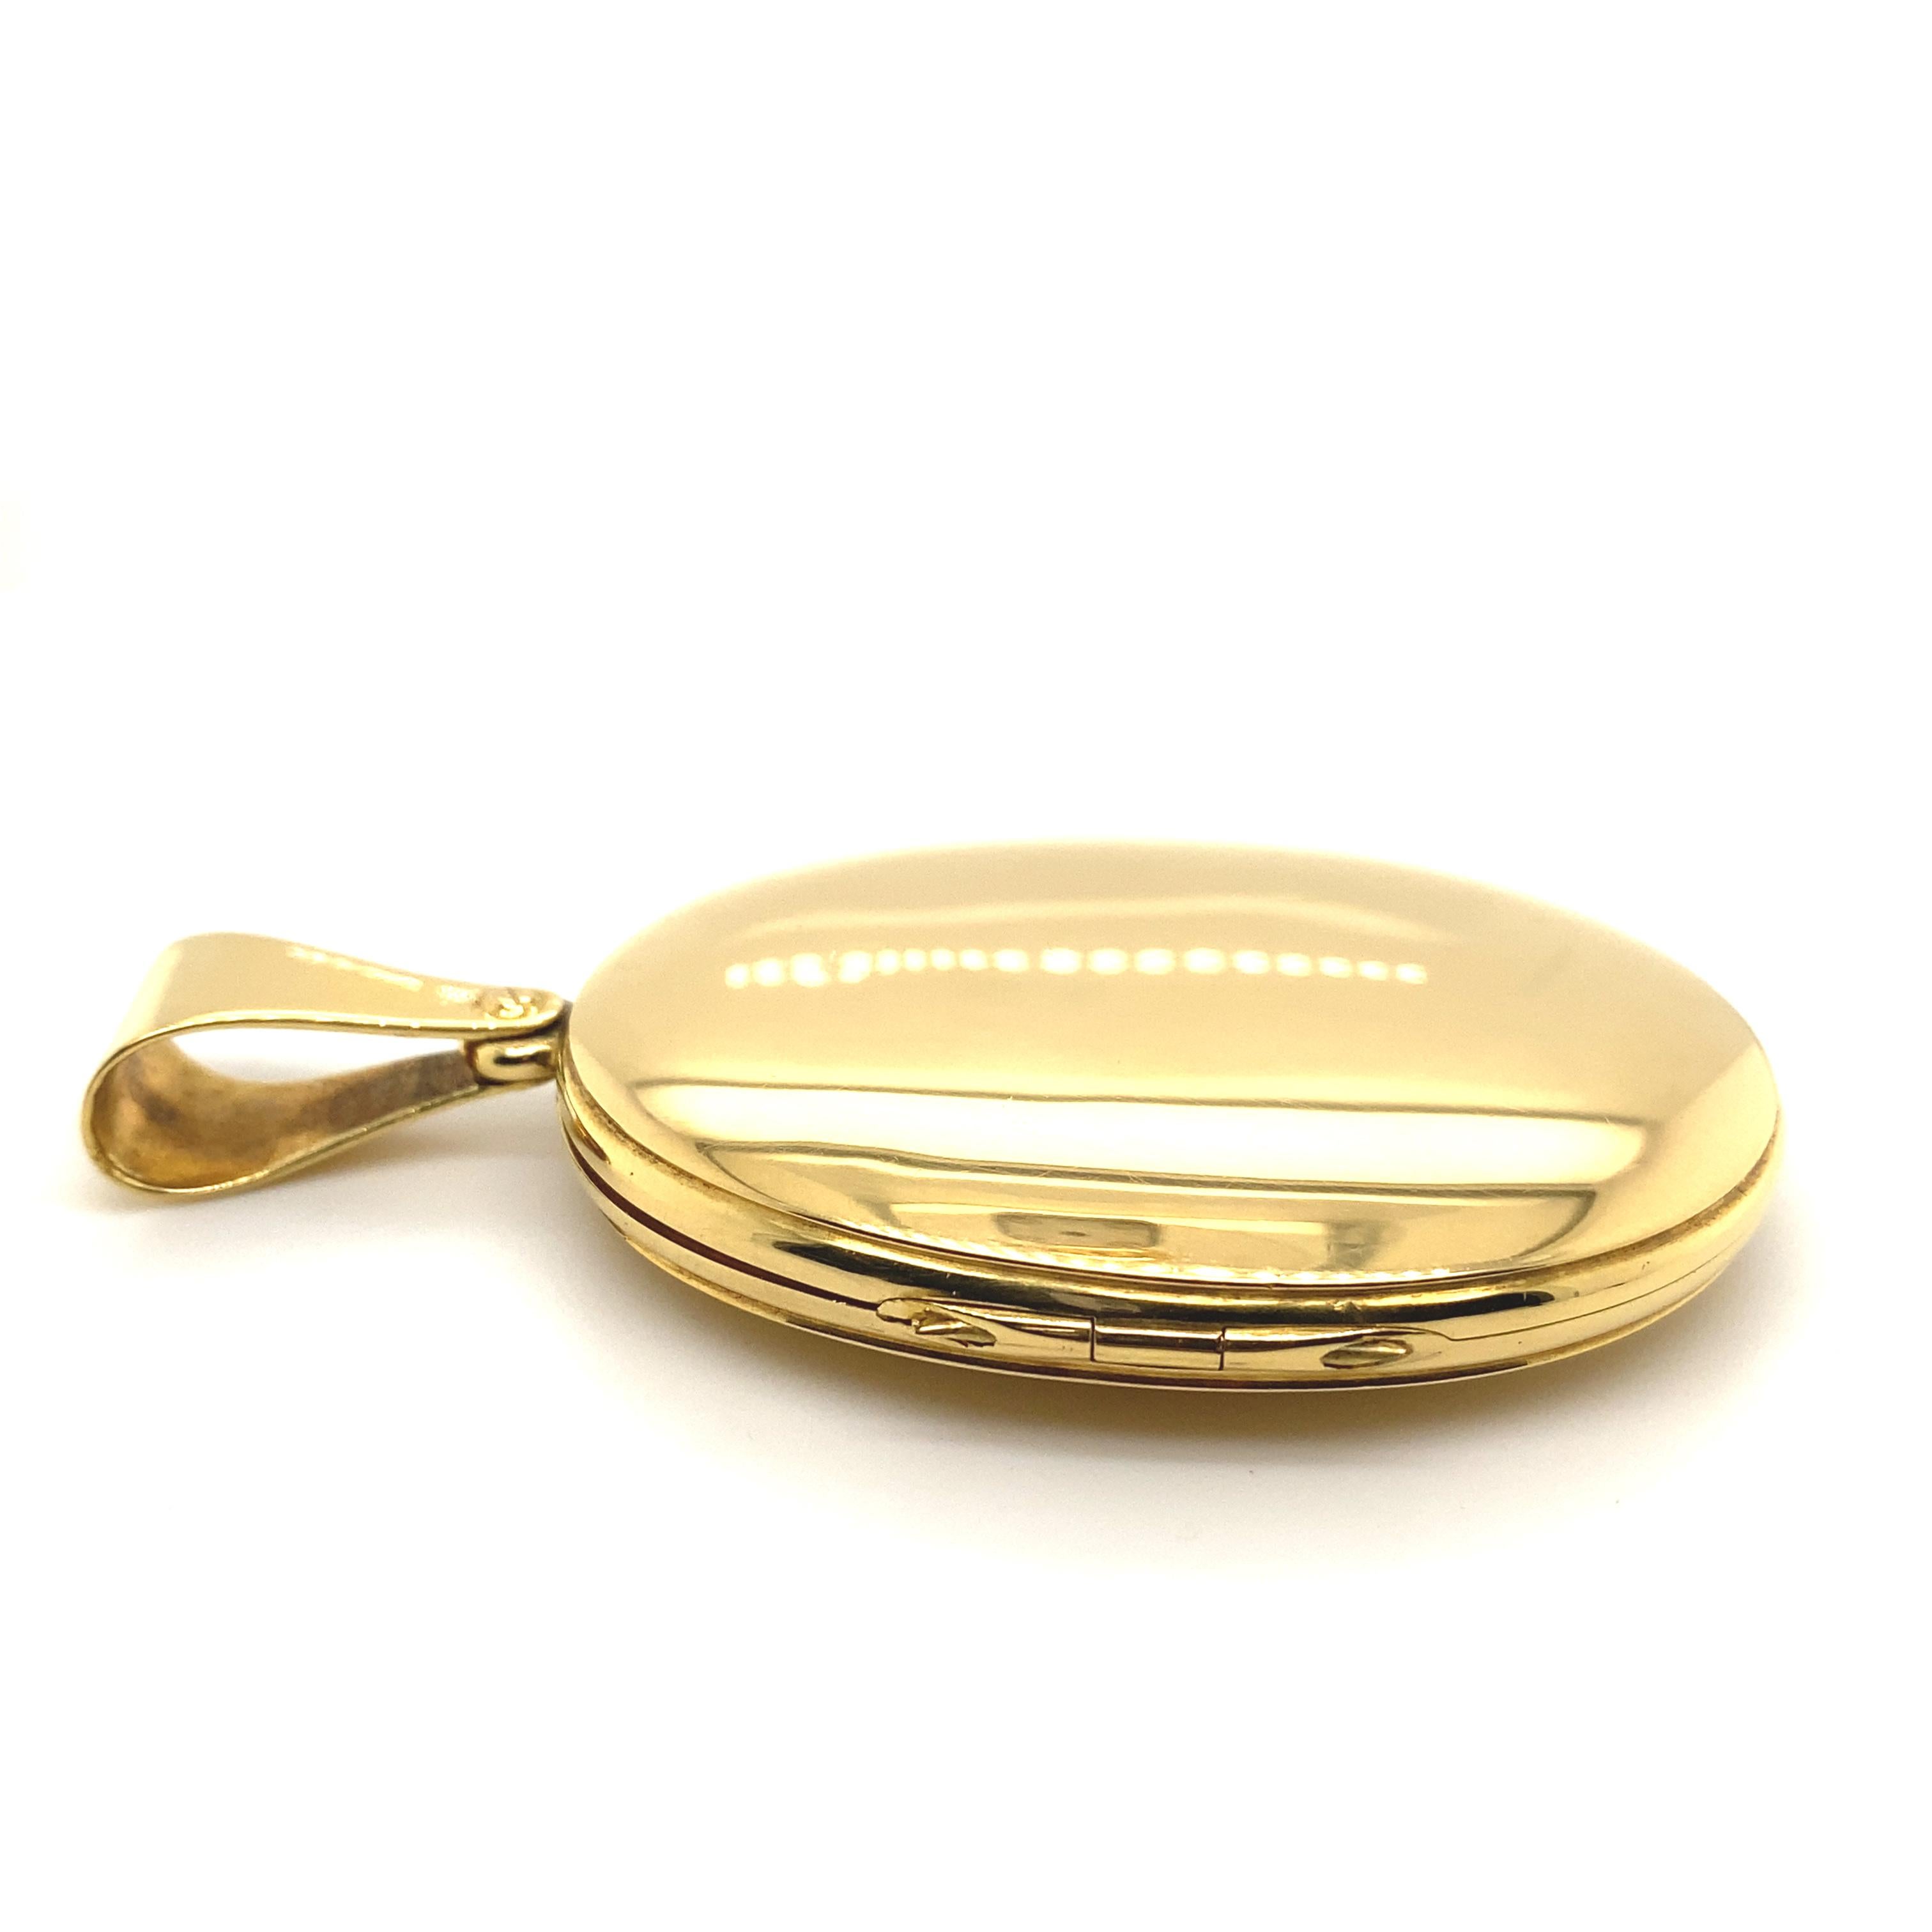 An oval locket in 18 karat yellow gold by John Brogden, circa 1870

A larger sized oval locket in 18 karat yellow gold, in a plain polished finish opening to reveal two halves lined with the original silk and fitted glass panels in which to place a